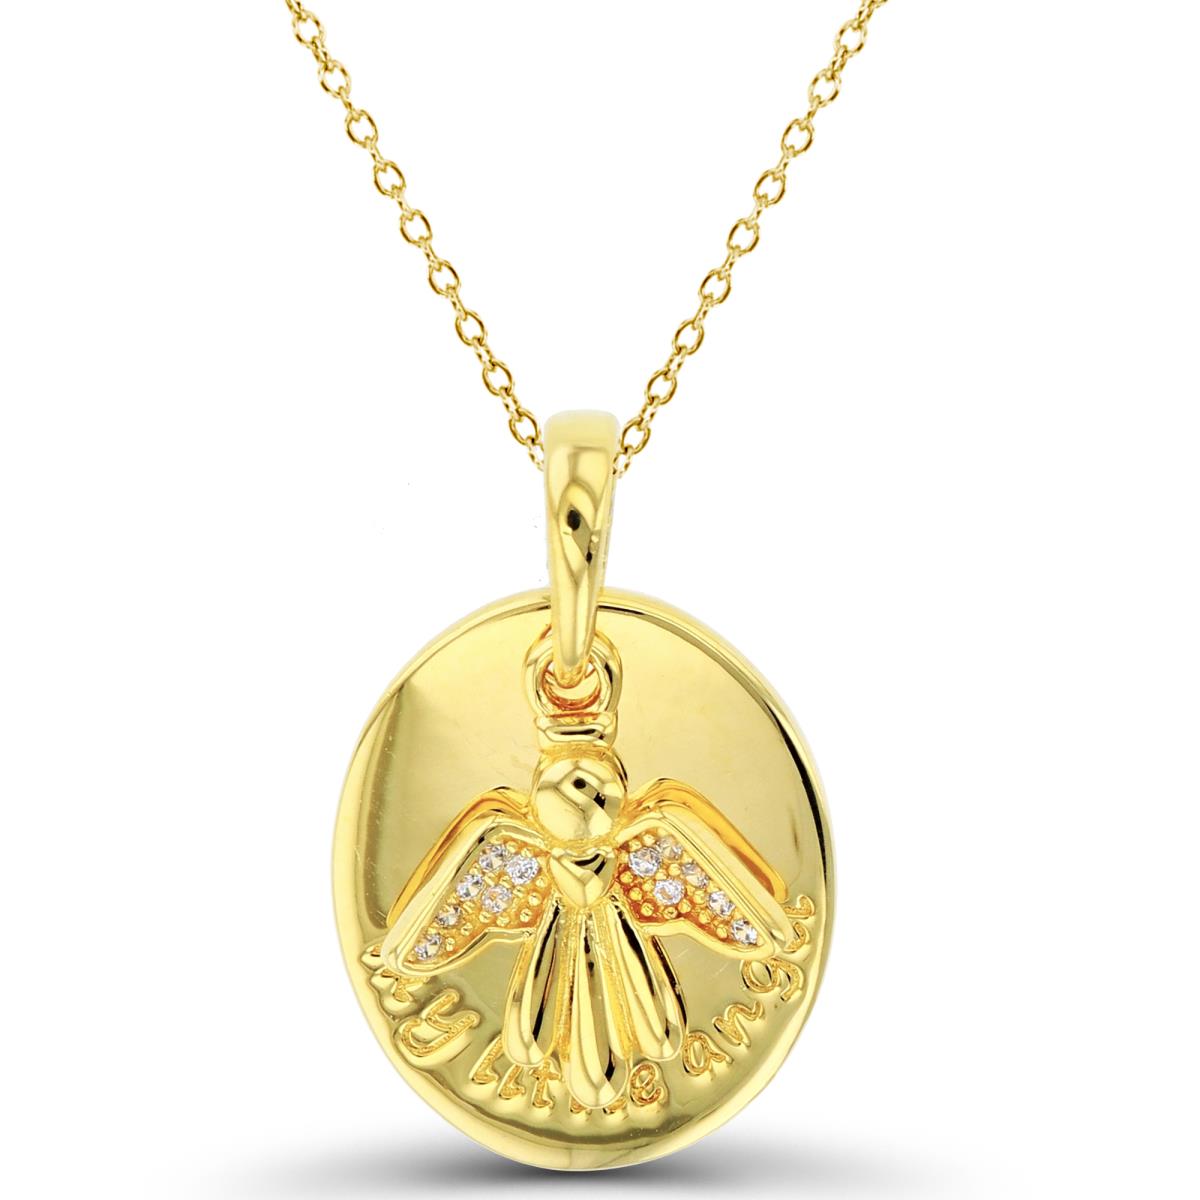 Sterling Silver+1Micron Yellow Gold High Polish Engraved Oval with DanglingTextured Rnd White CZ Angel 18"Necklace